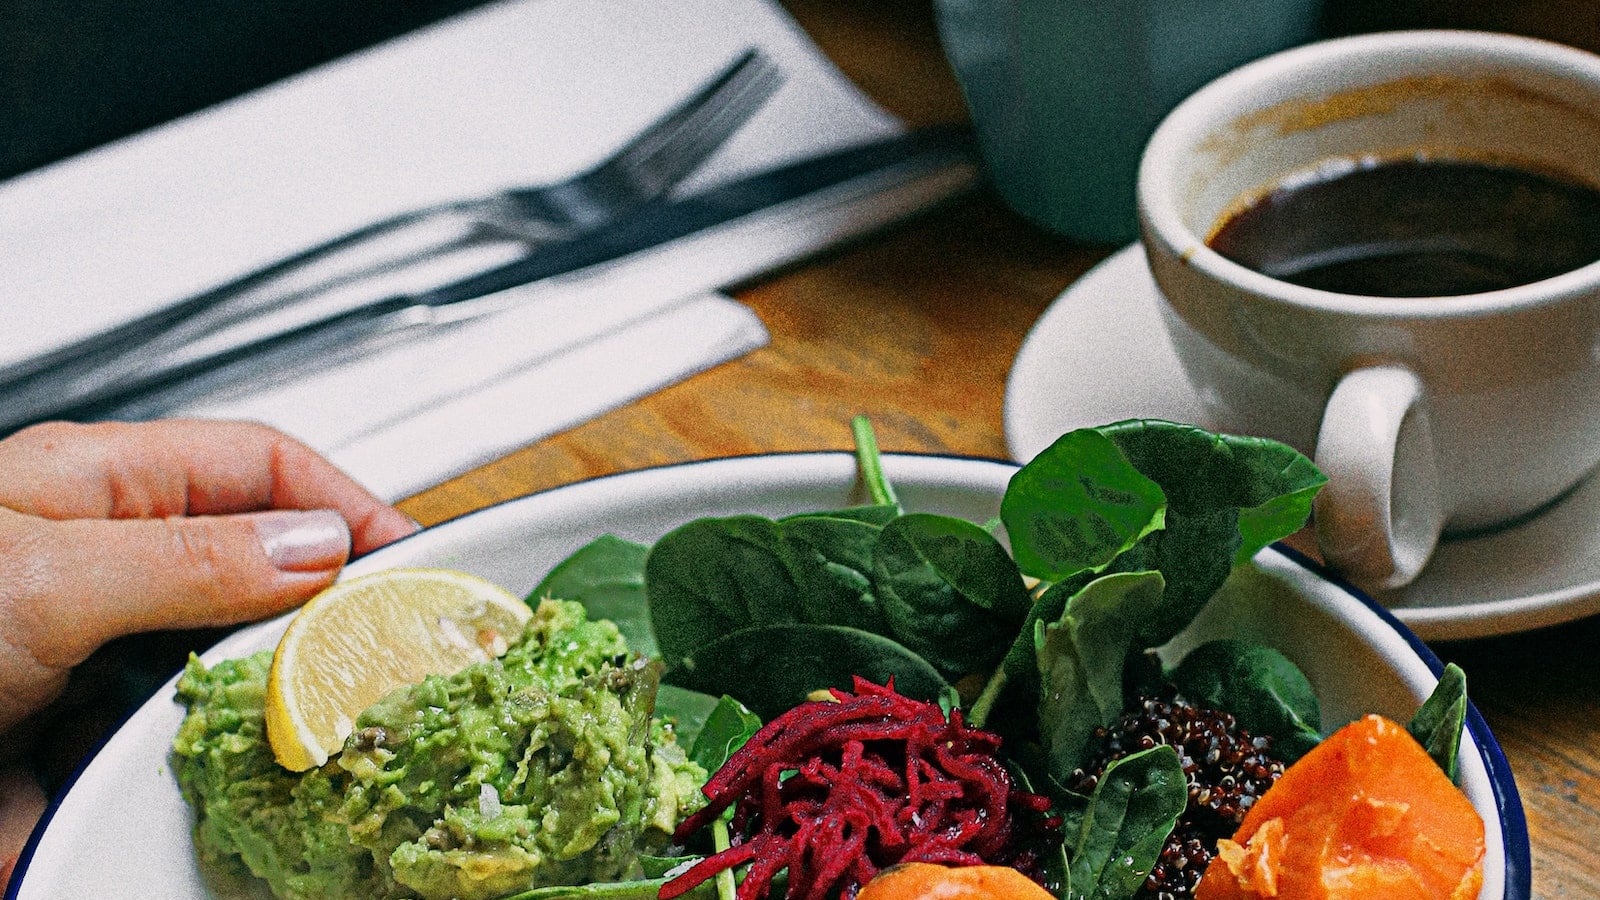 How To Eat Healthy When Dining Out, According To Nutritionists